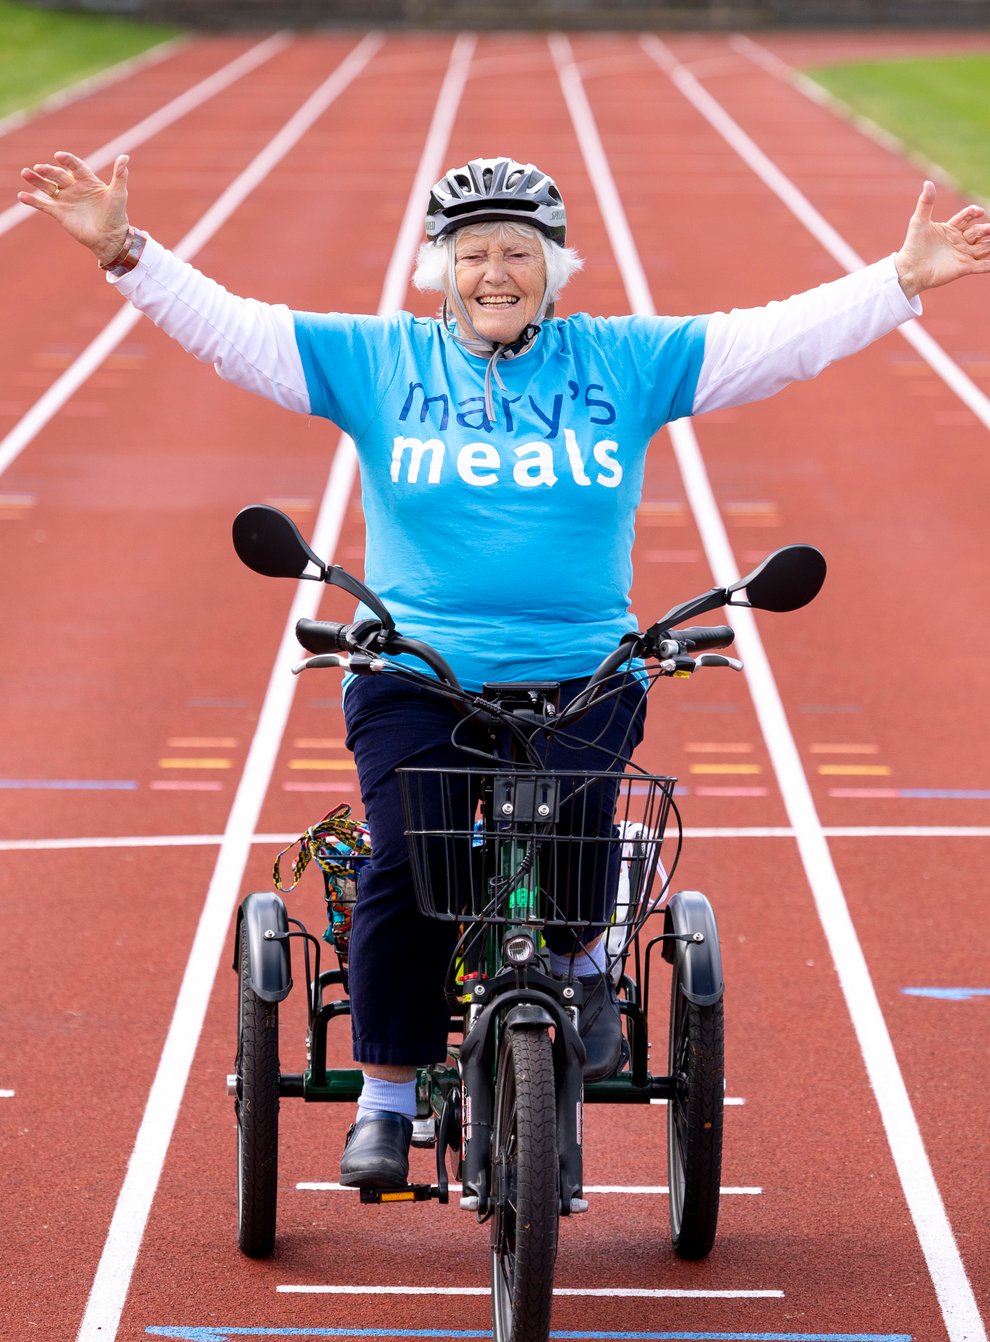 Ellison Hudson is carrying out the challenge at the University of Stirling race track (Martin Shields/Mary’s Meals/PA)